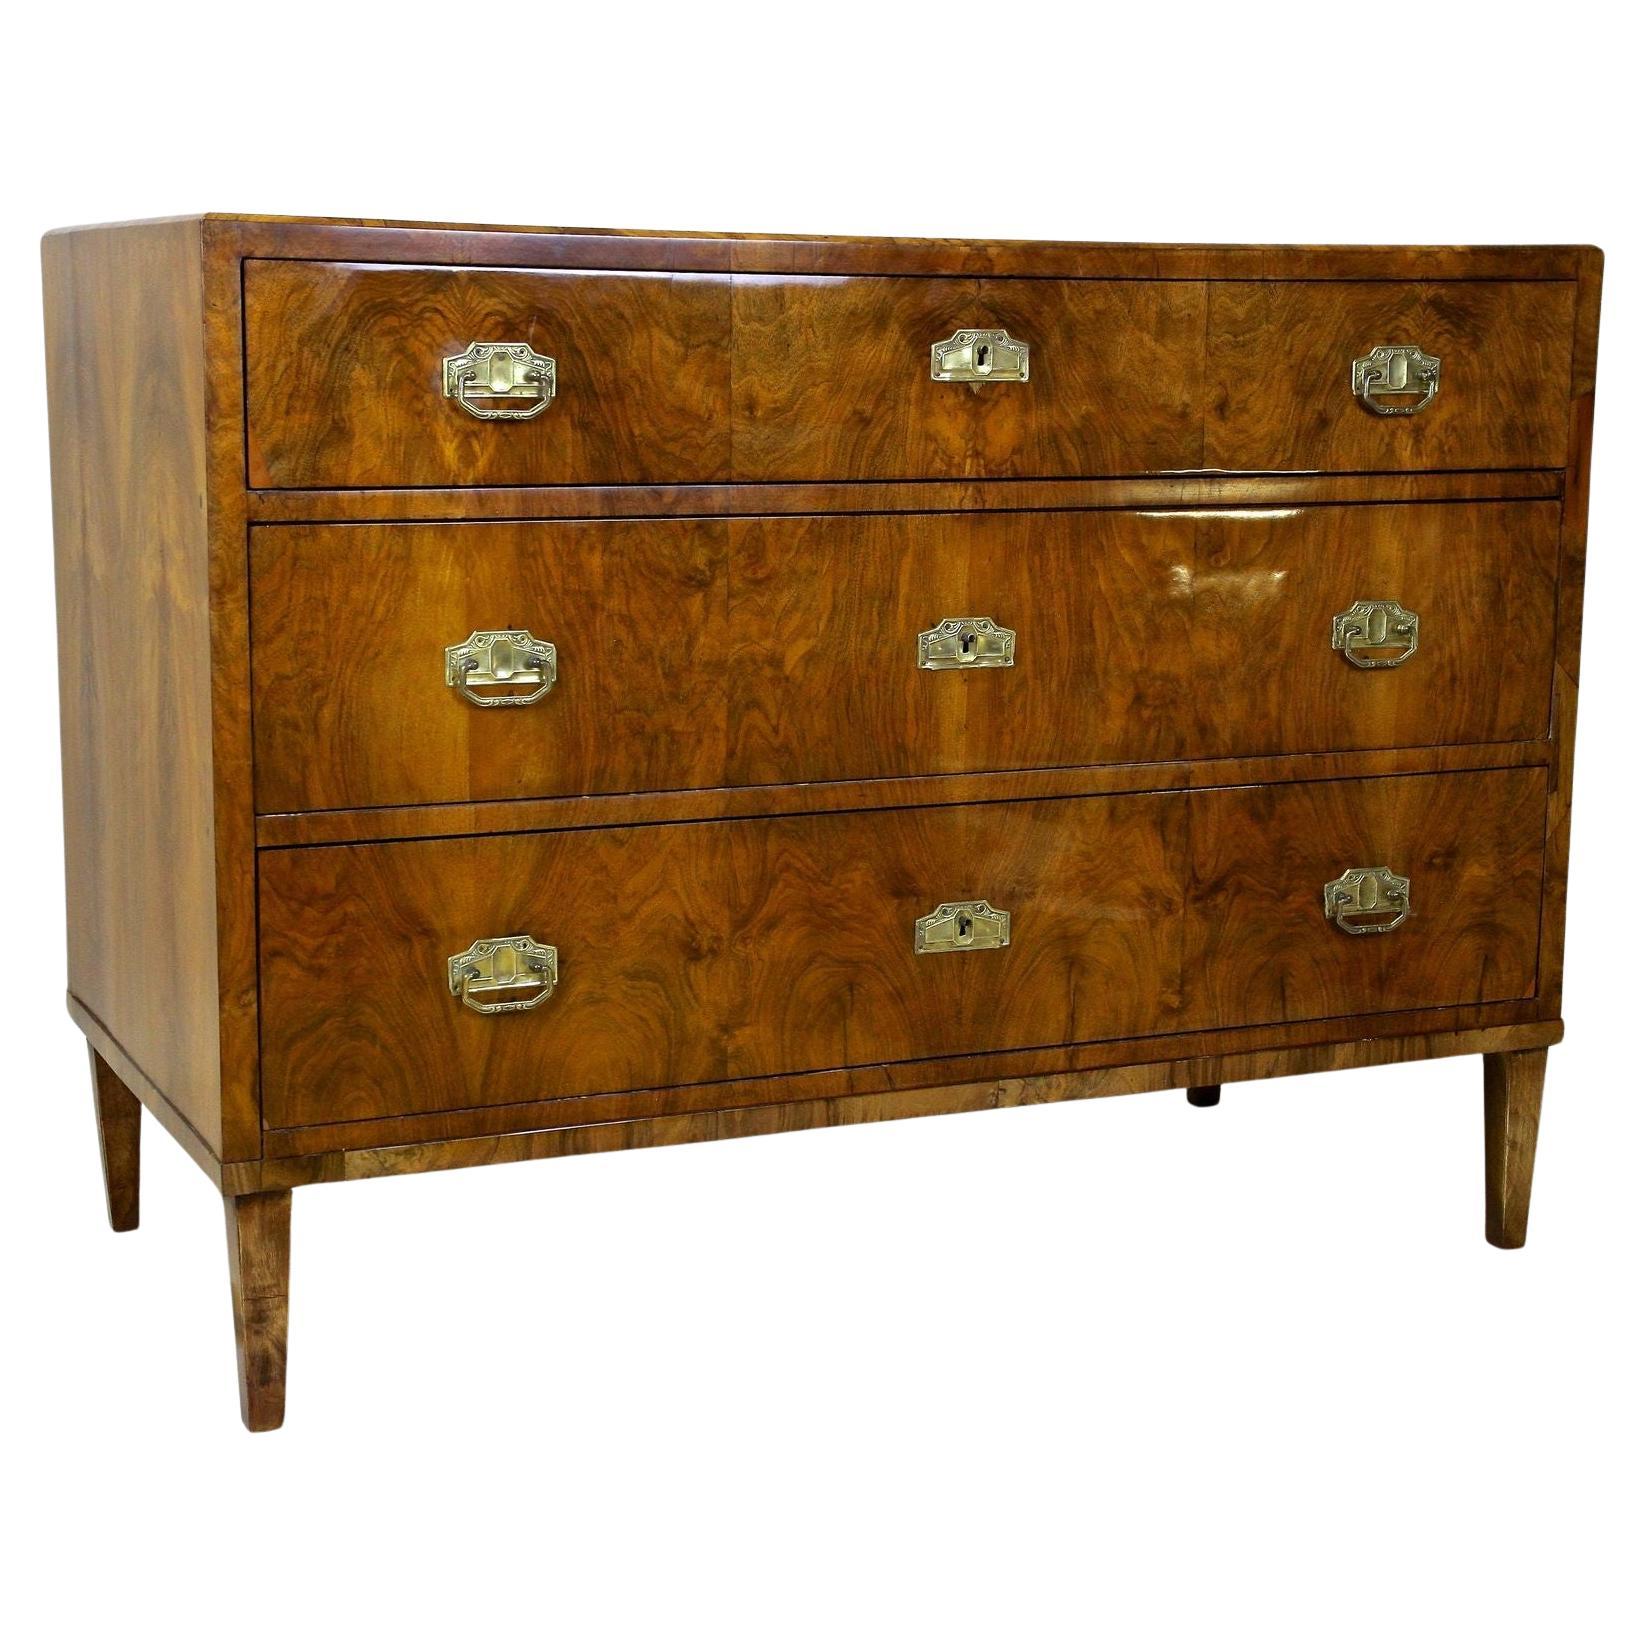 19th Century Biedermeier Nutwood Chest of Drawers/ Writing Commode, AT ca. 1840